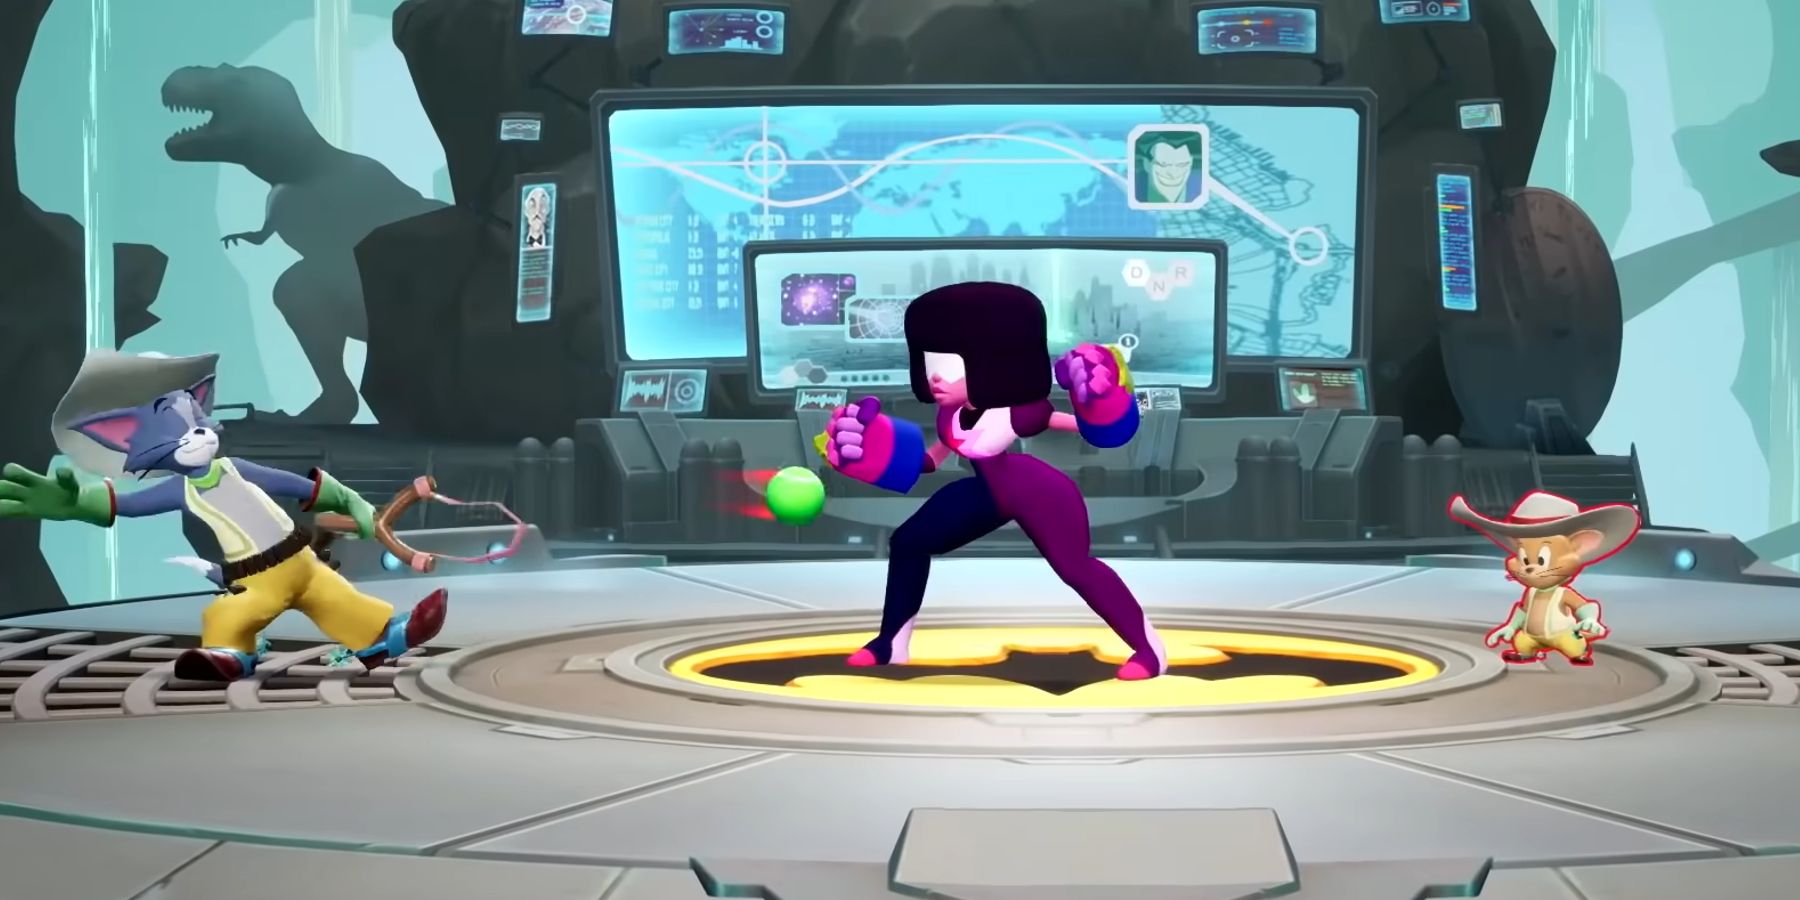 Garnet fighting Tom And Jerry in the Batcave in MultiVersus